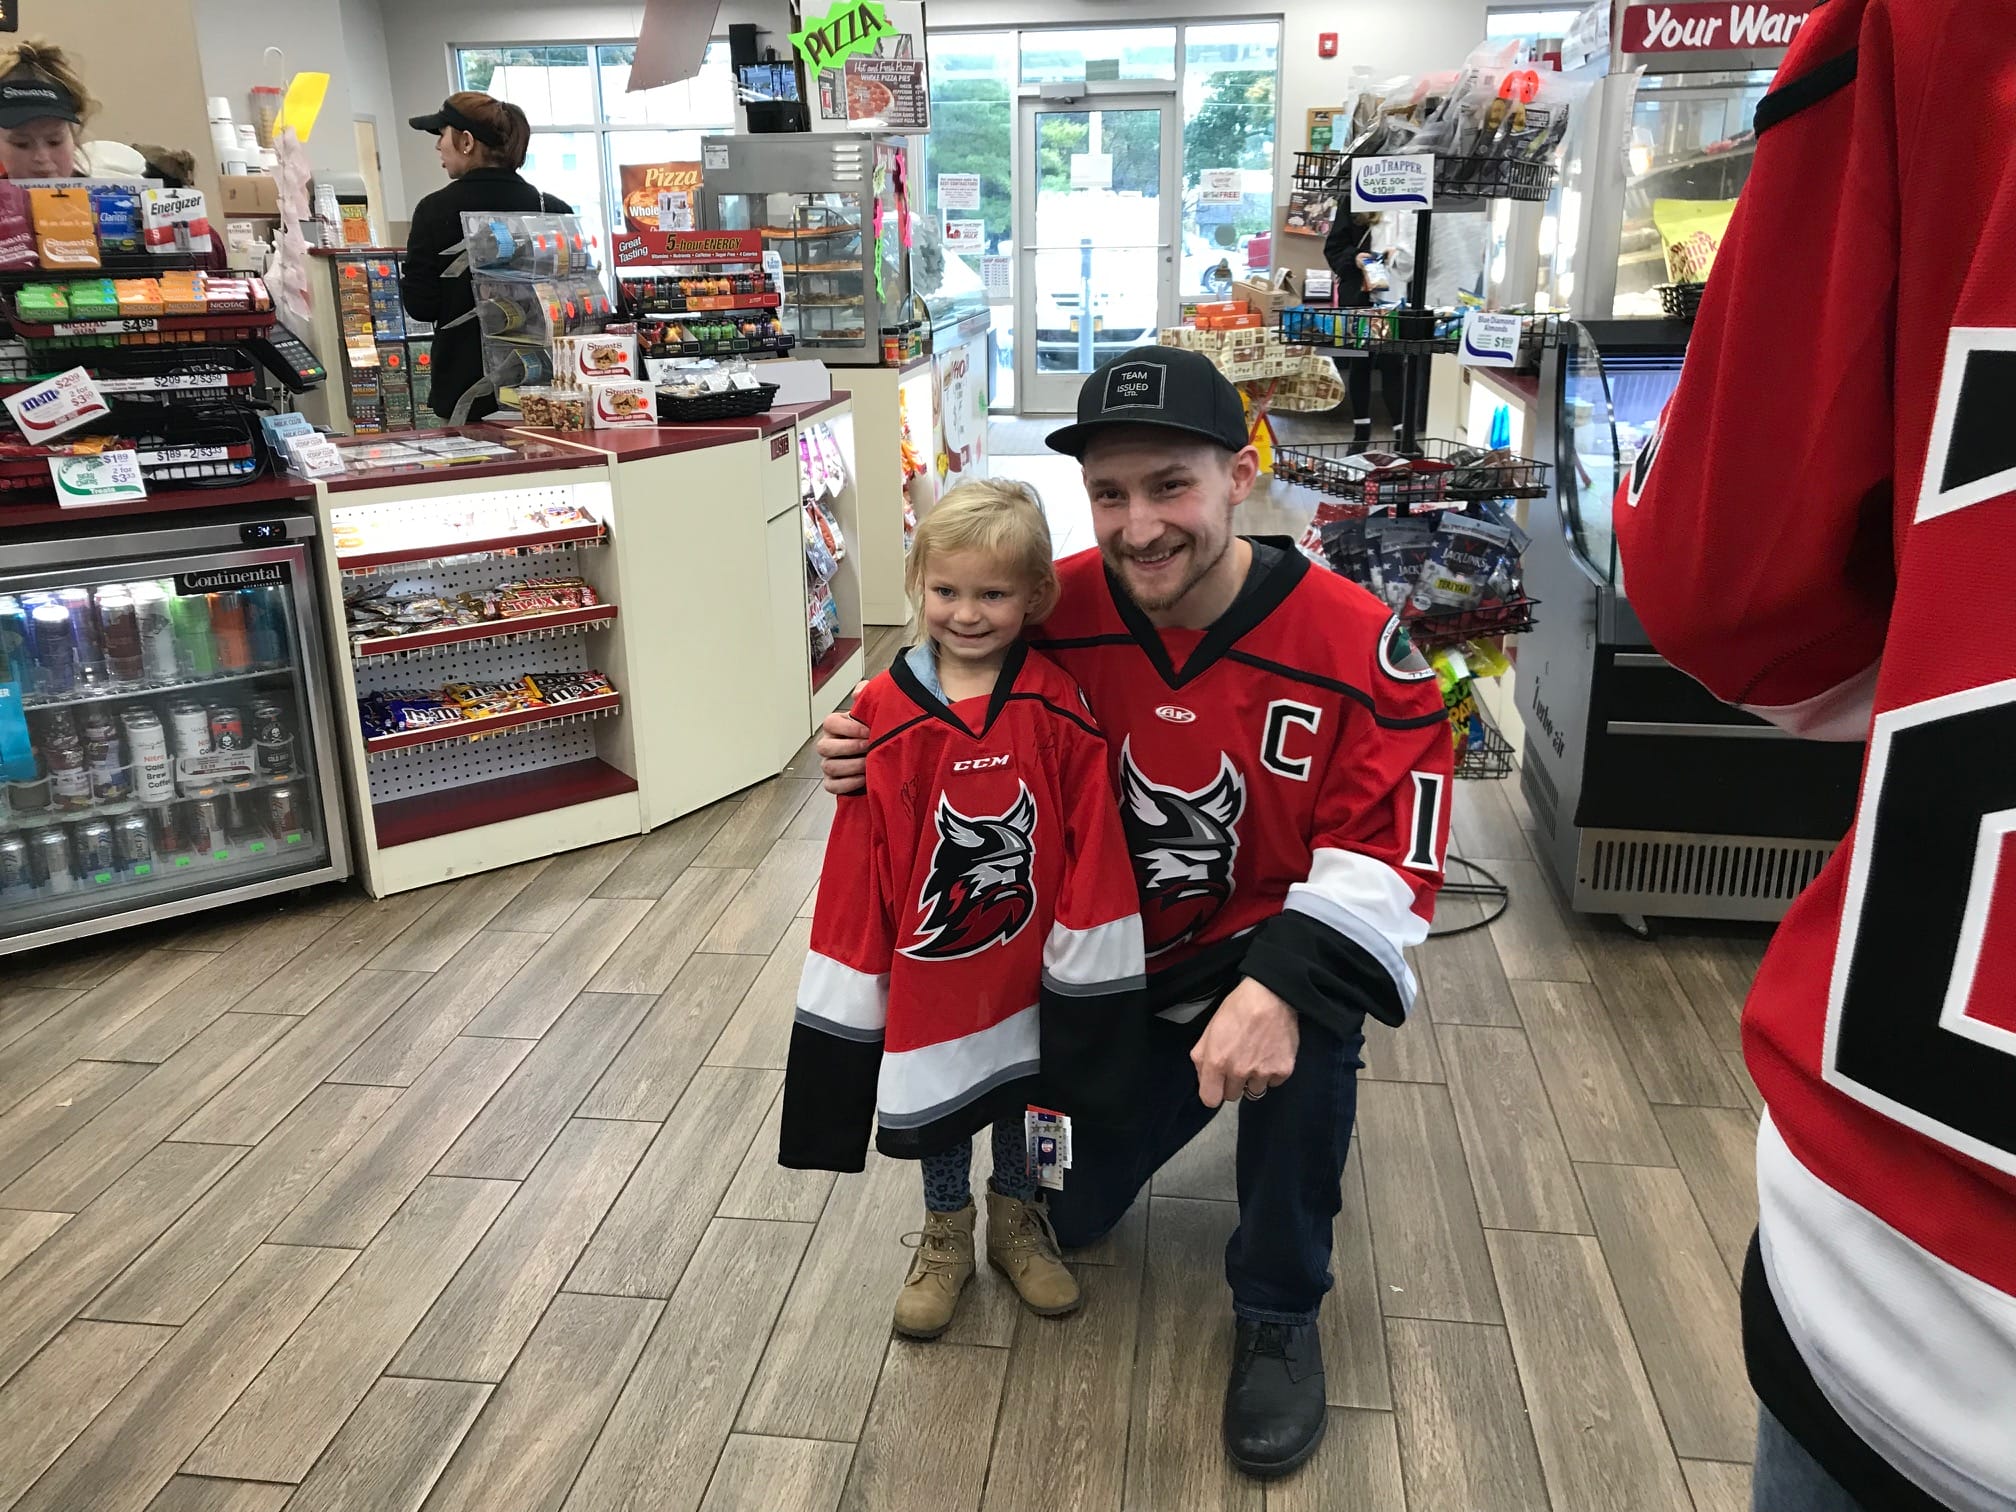 Hockey Player posing with Young fan